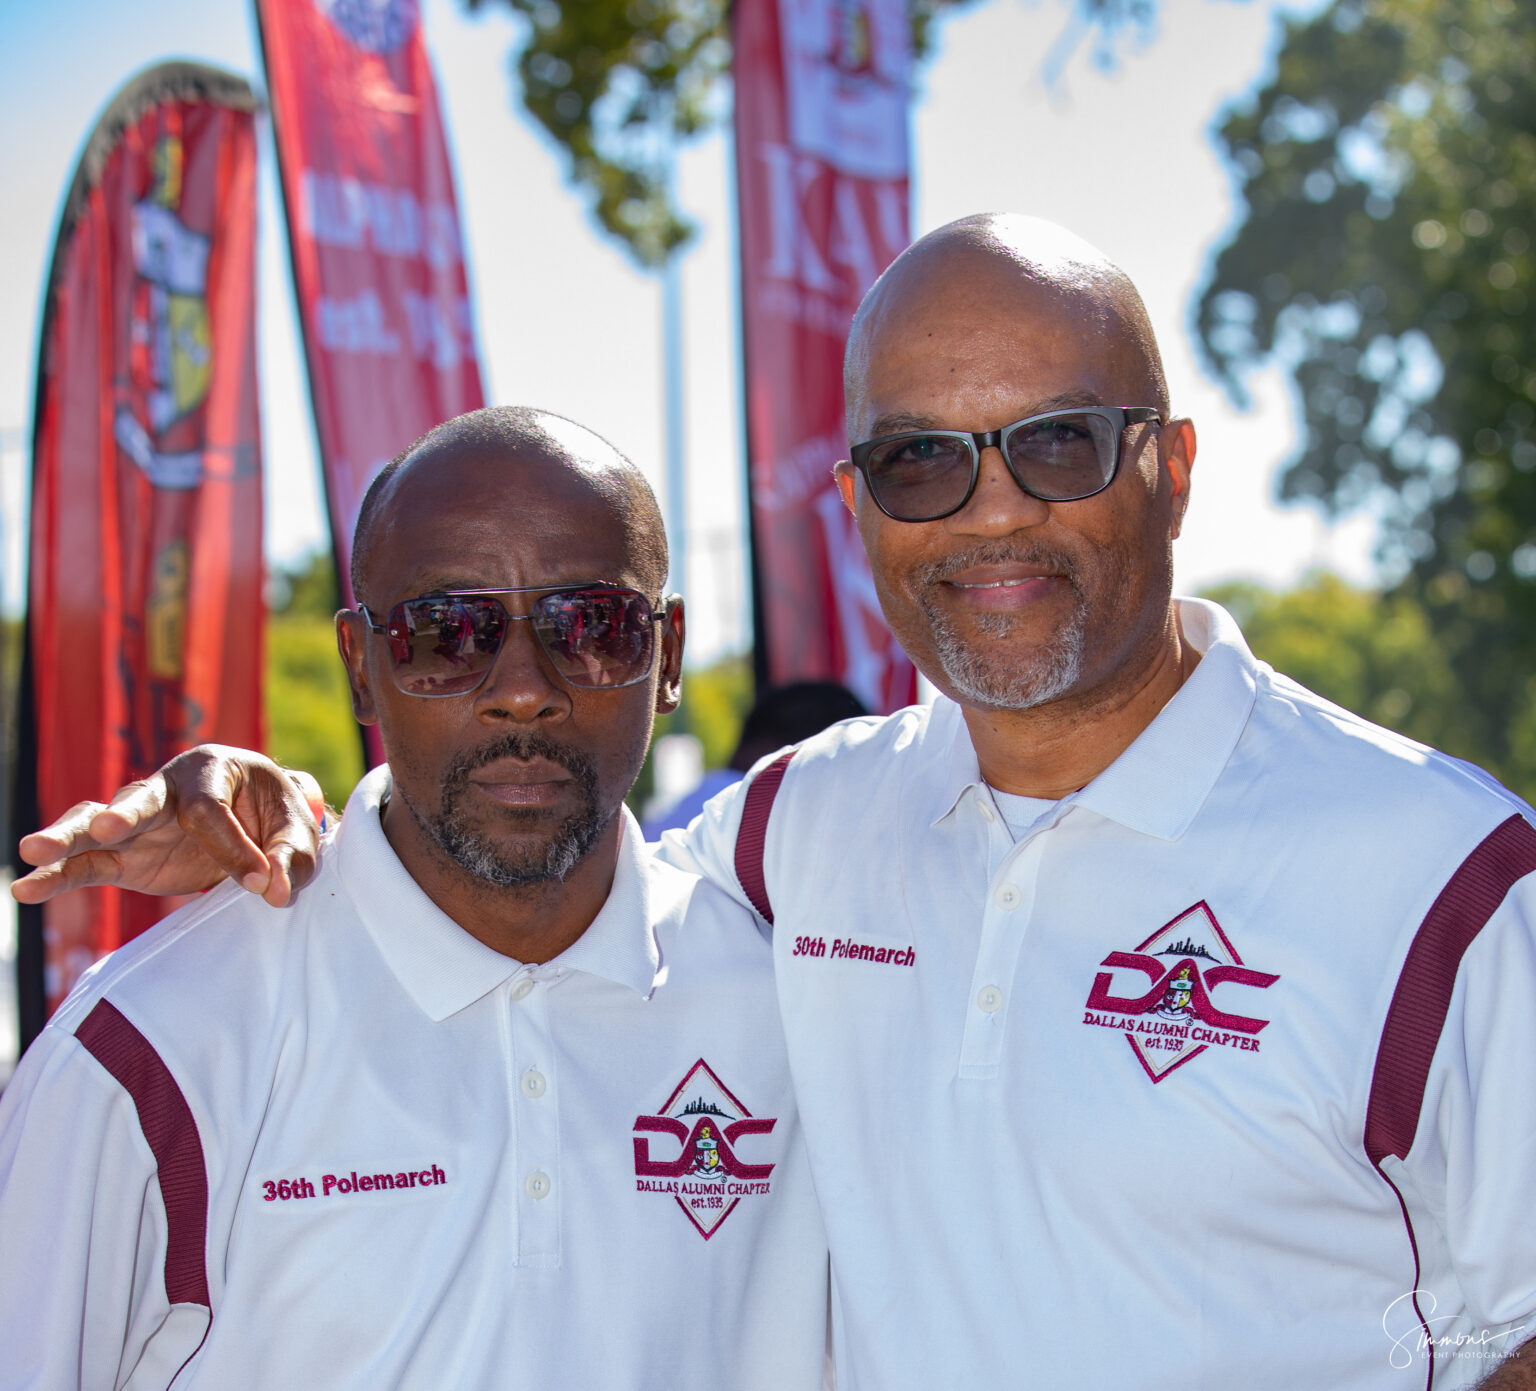 two men from the 36th Polemarch taking a photo